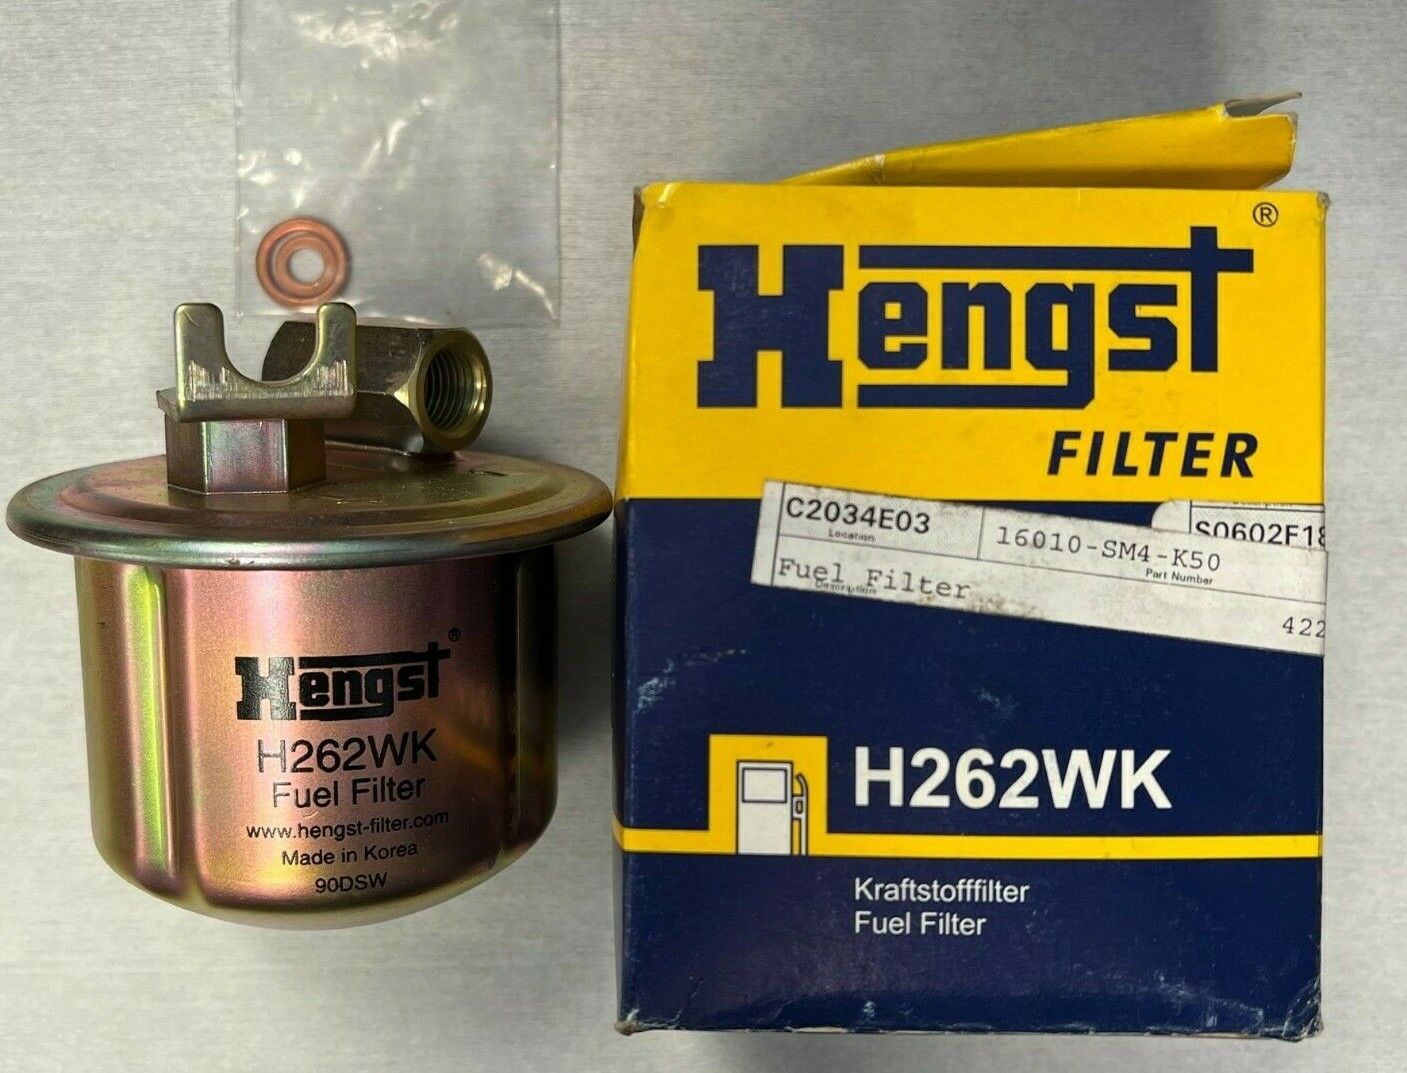 Fuel Filter Hengst H262WK fits 1990 - 1994 Honda Accord Civic